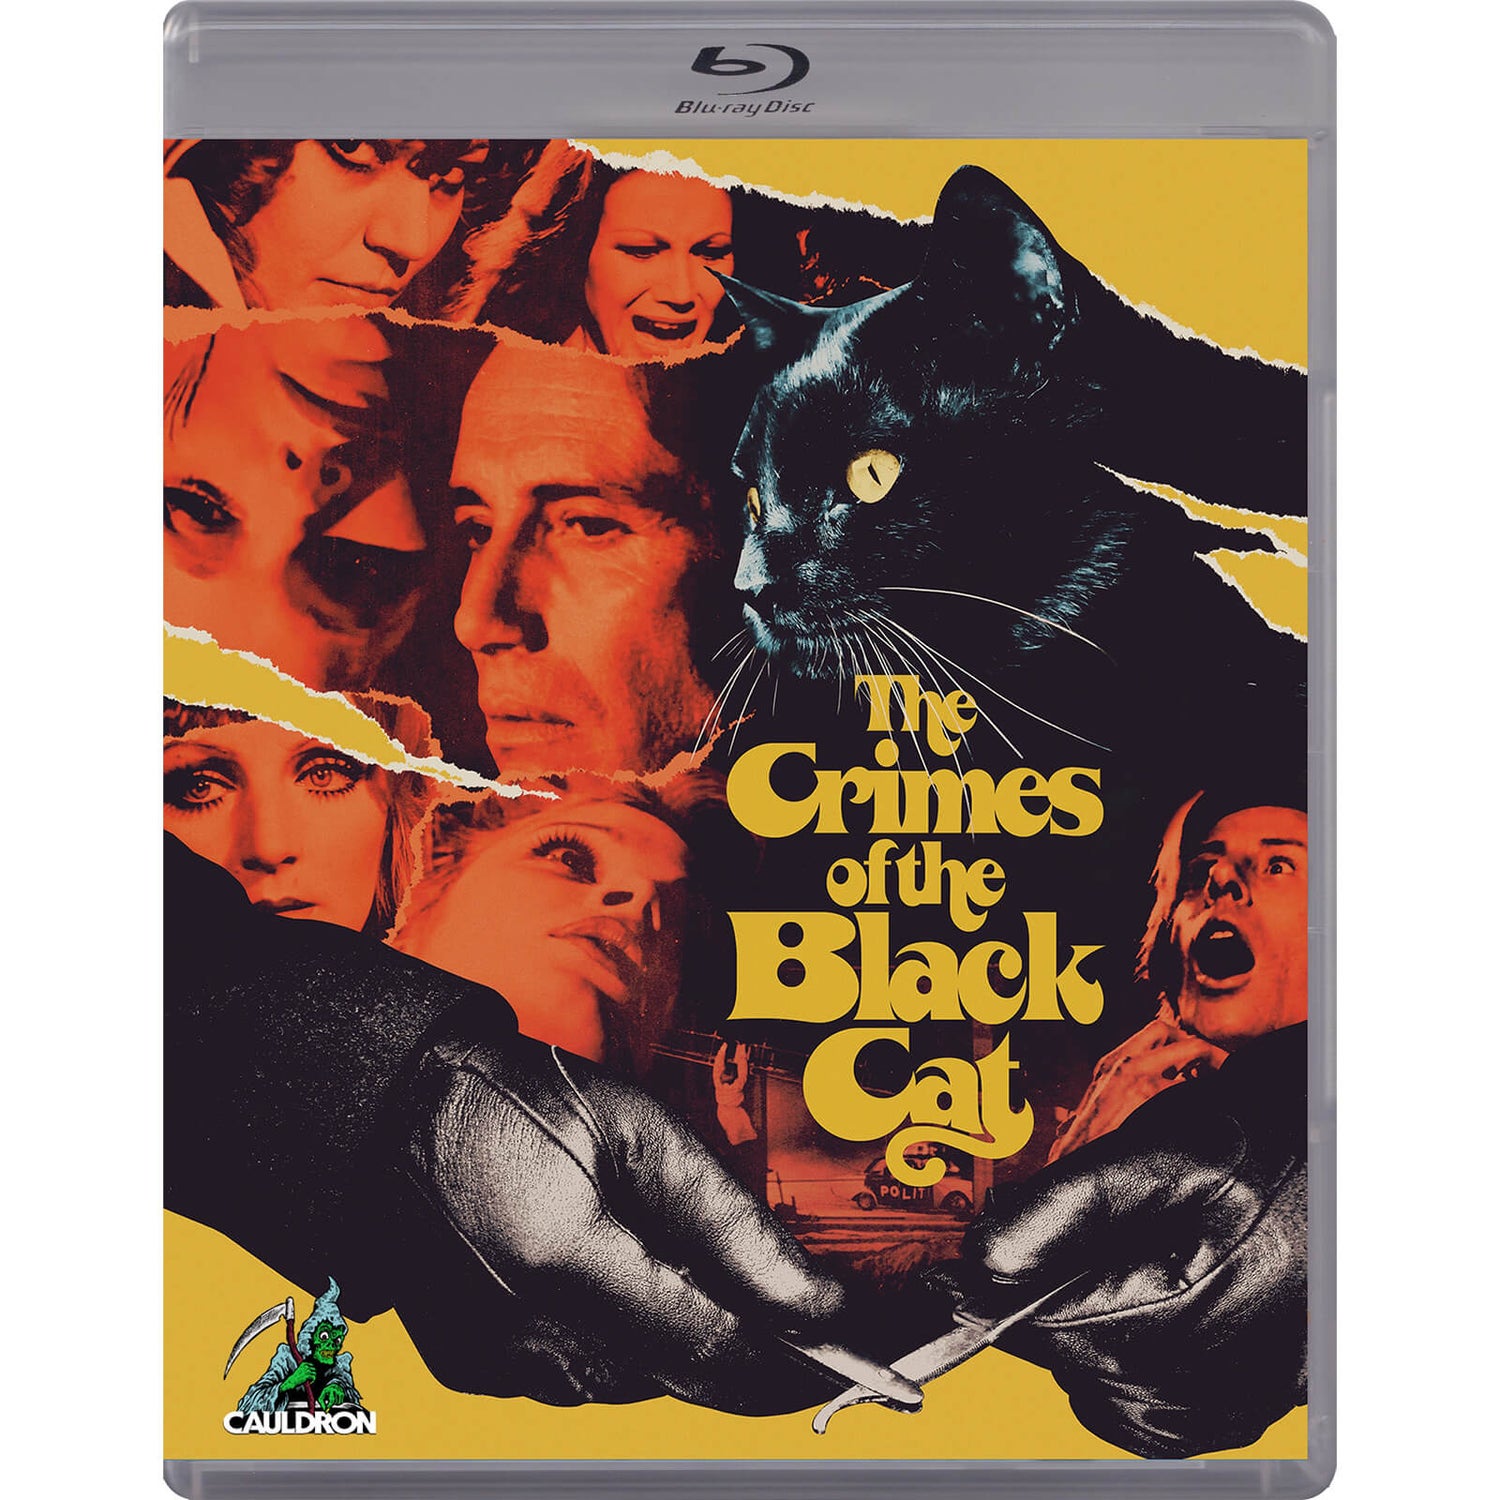 The Crimes Of The Black Cat